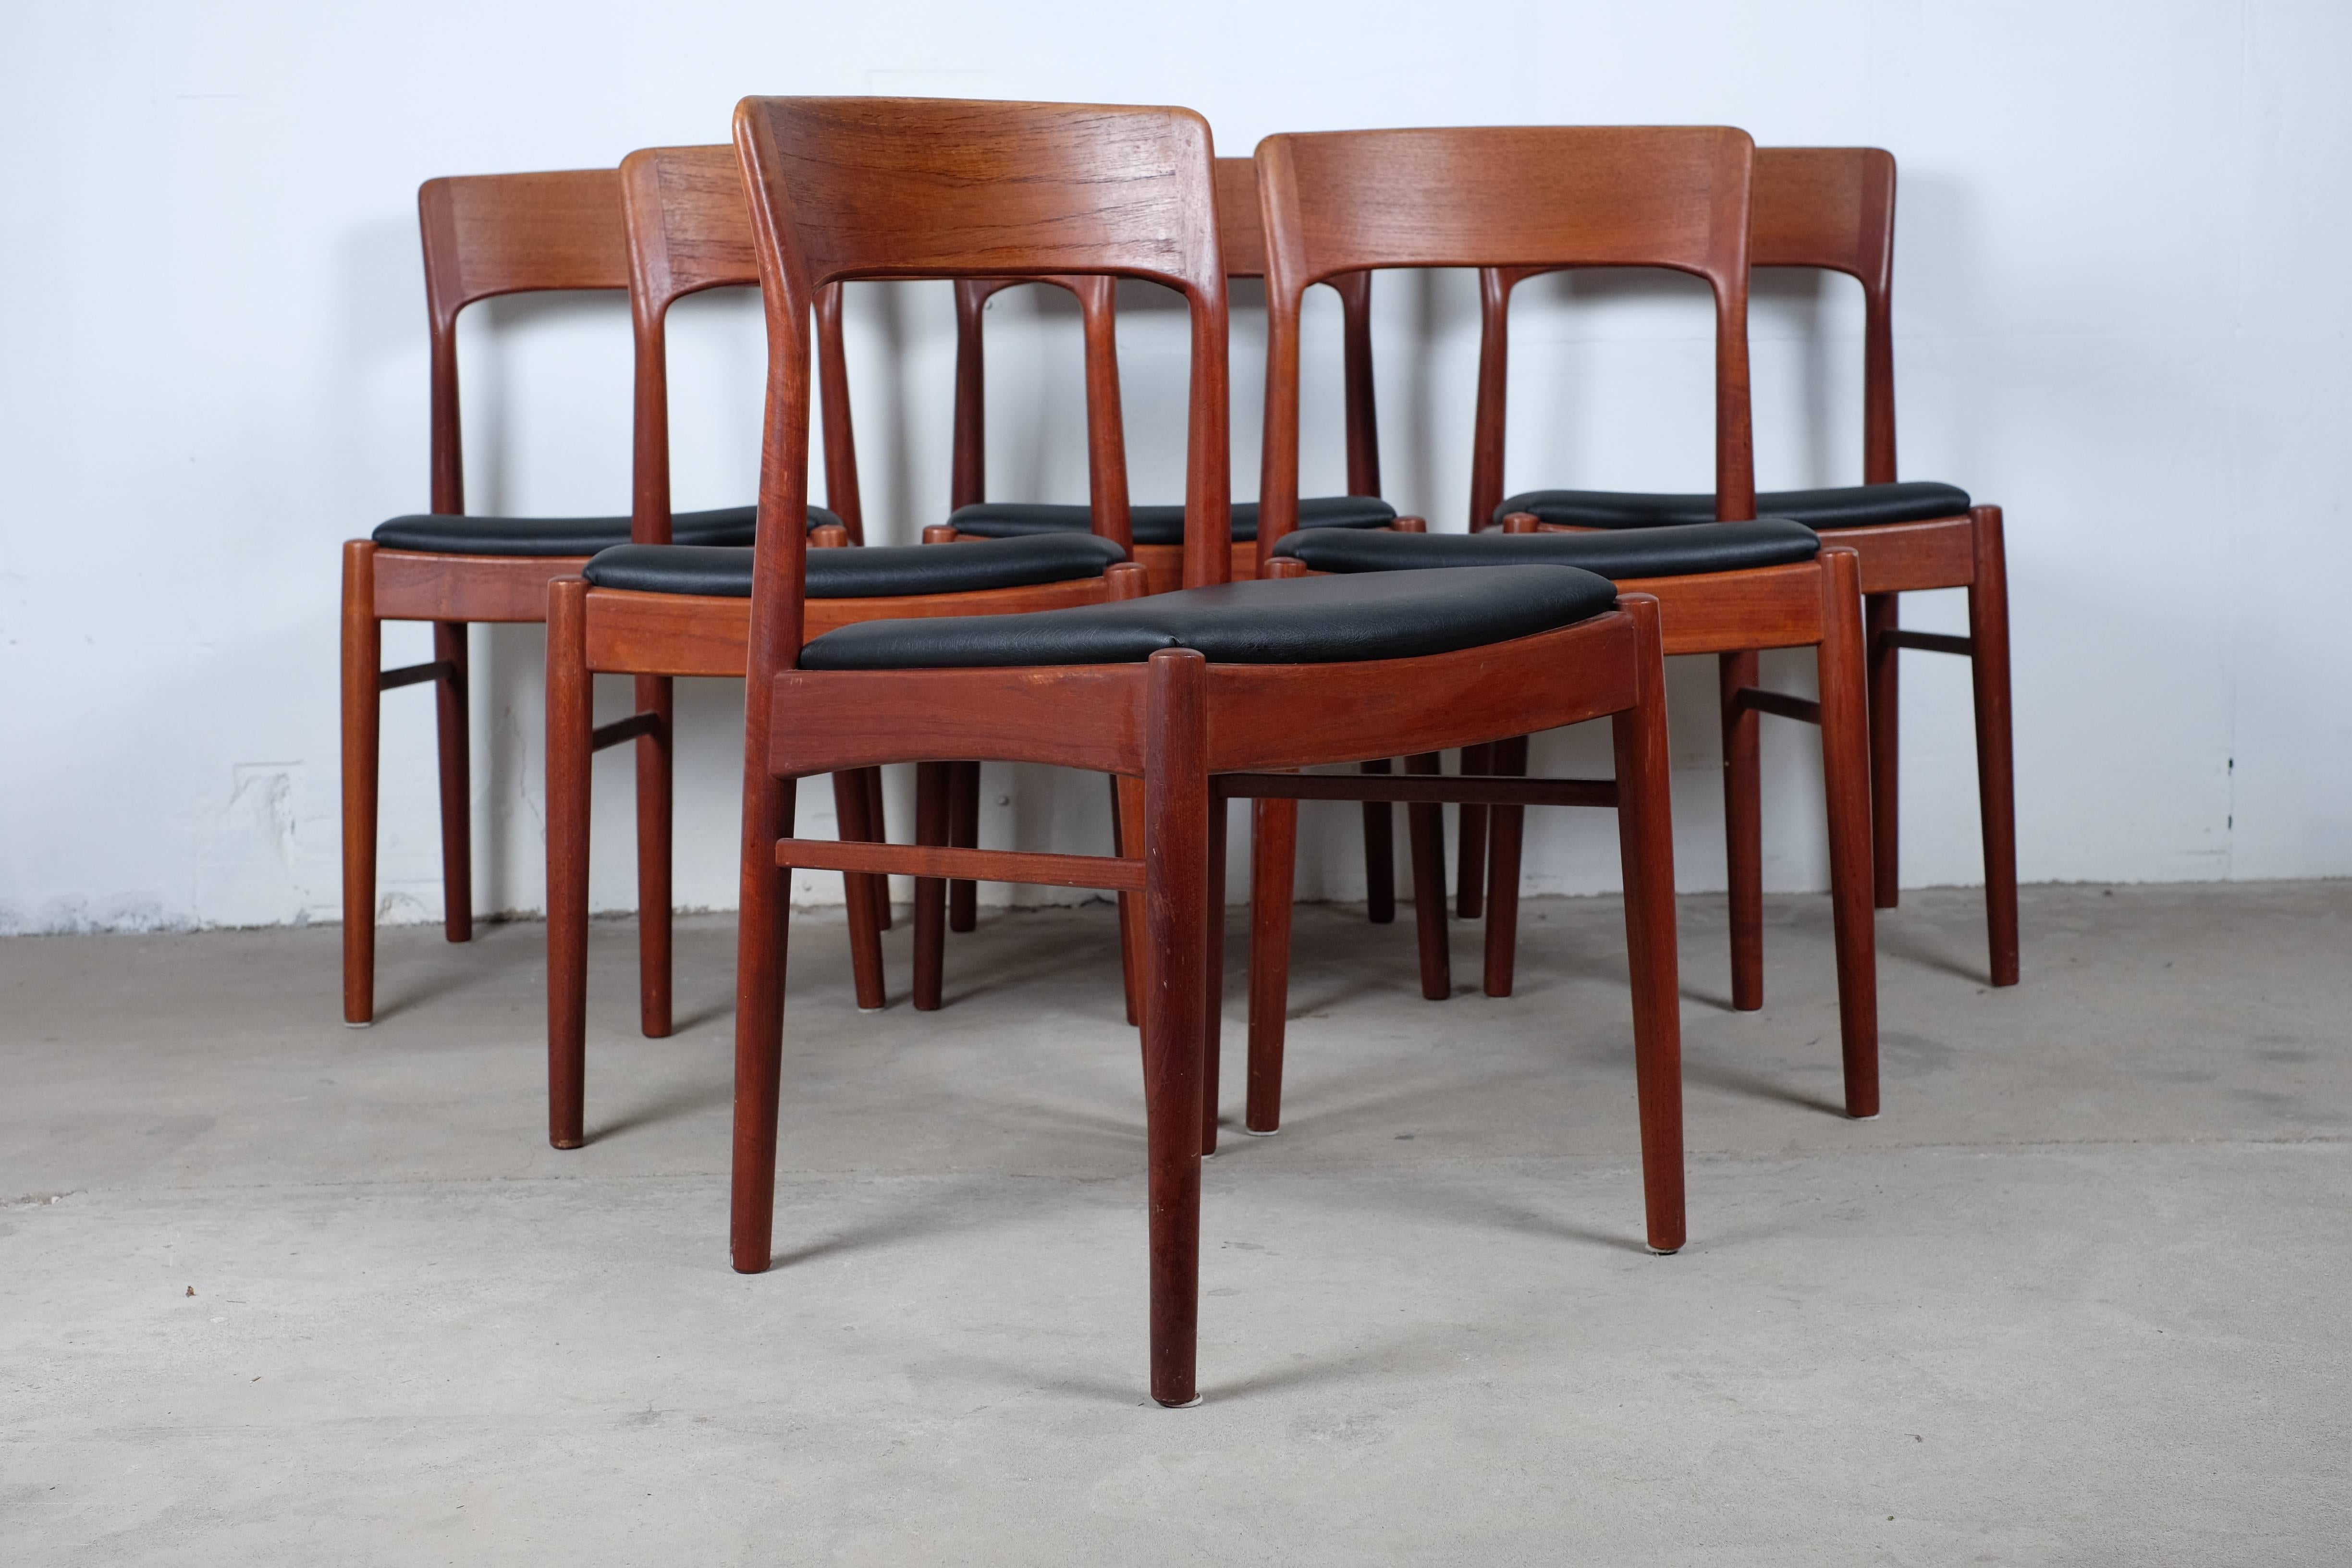 Craftsmanship throughout featuring a solid rosewood frame with a sculpted backrest and new-upholstered with real leather on the seats. 

This is a very comfortable dining chair - with tons of Danish Mid-Century Modern era character.

The chairs